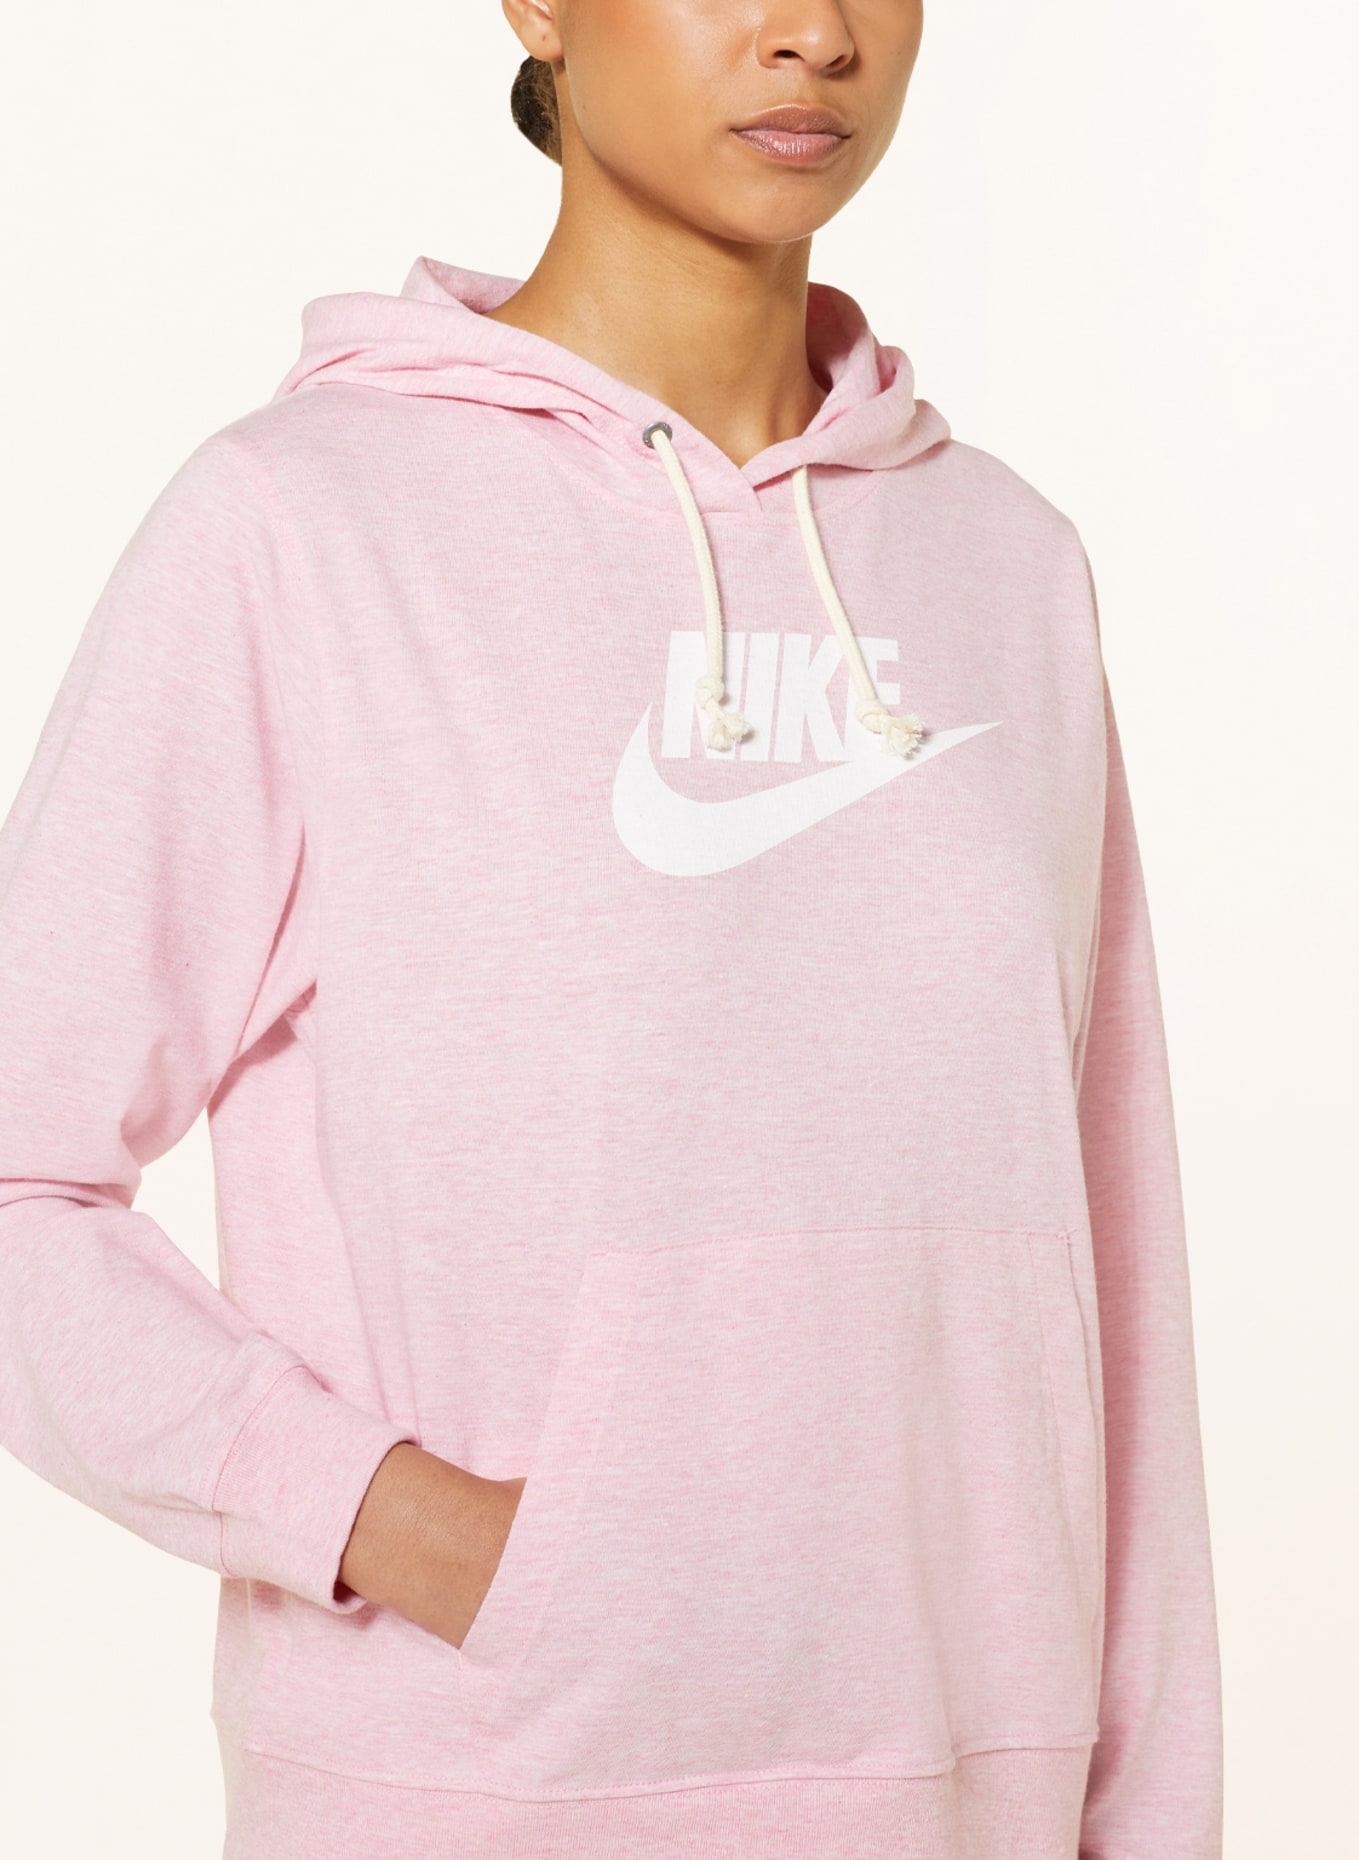 Nike Hoodie Womens Small Black Pink Swoosh Pullover Sports Gym